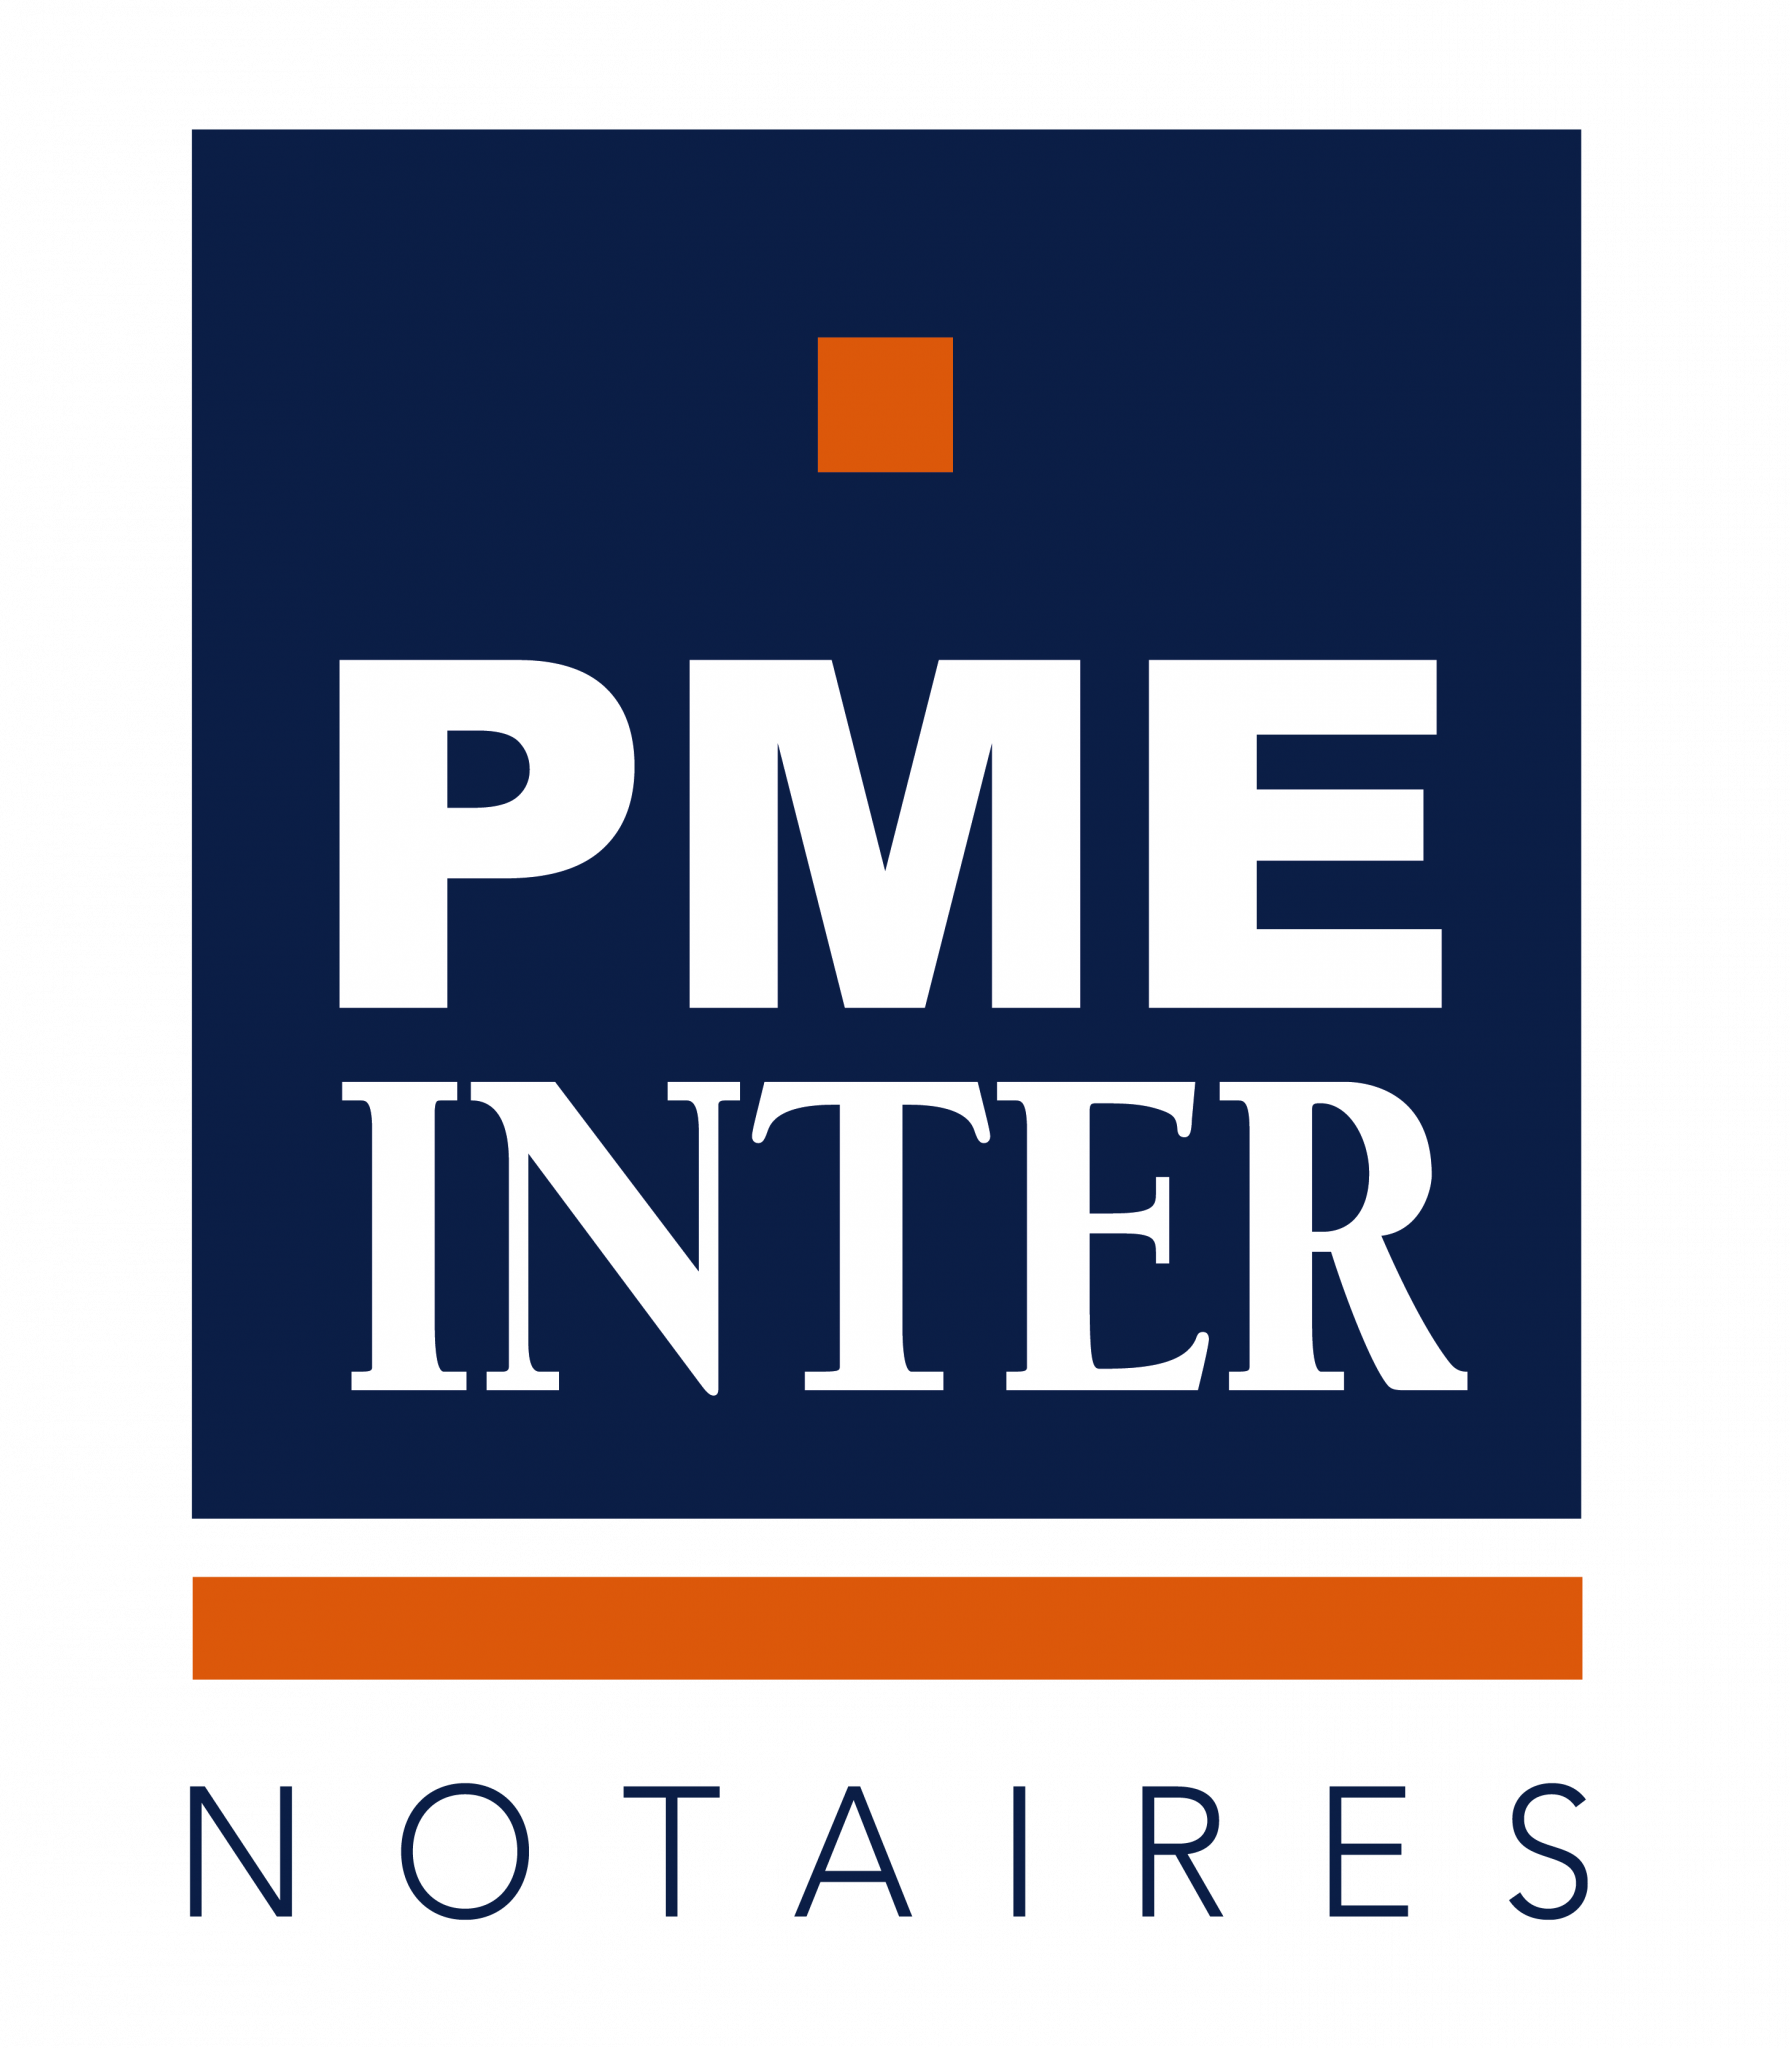 PME INTER NOTAIRES